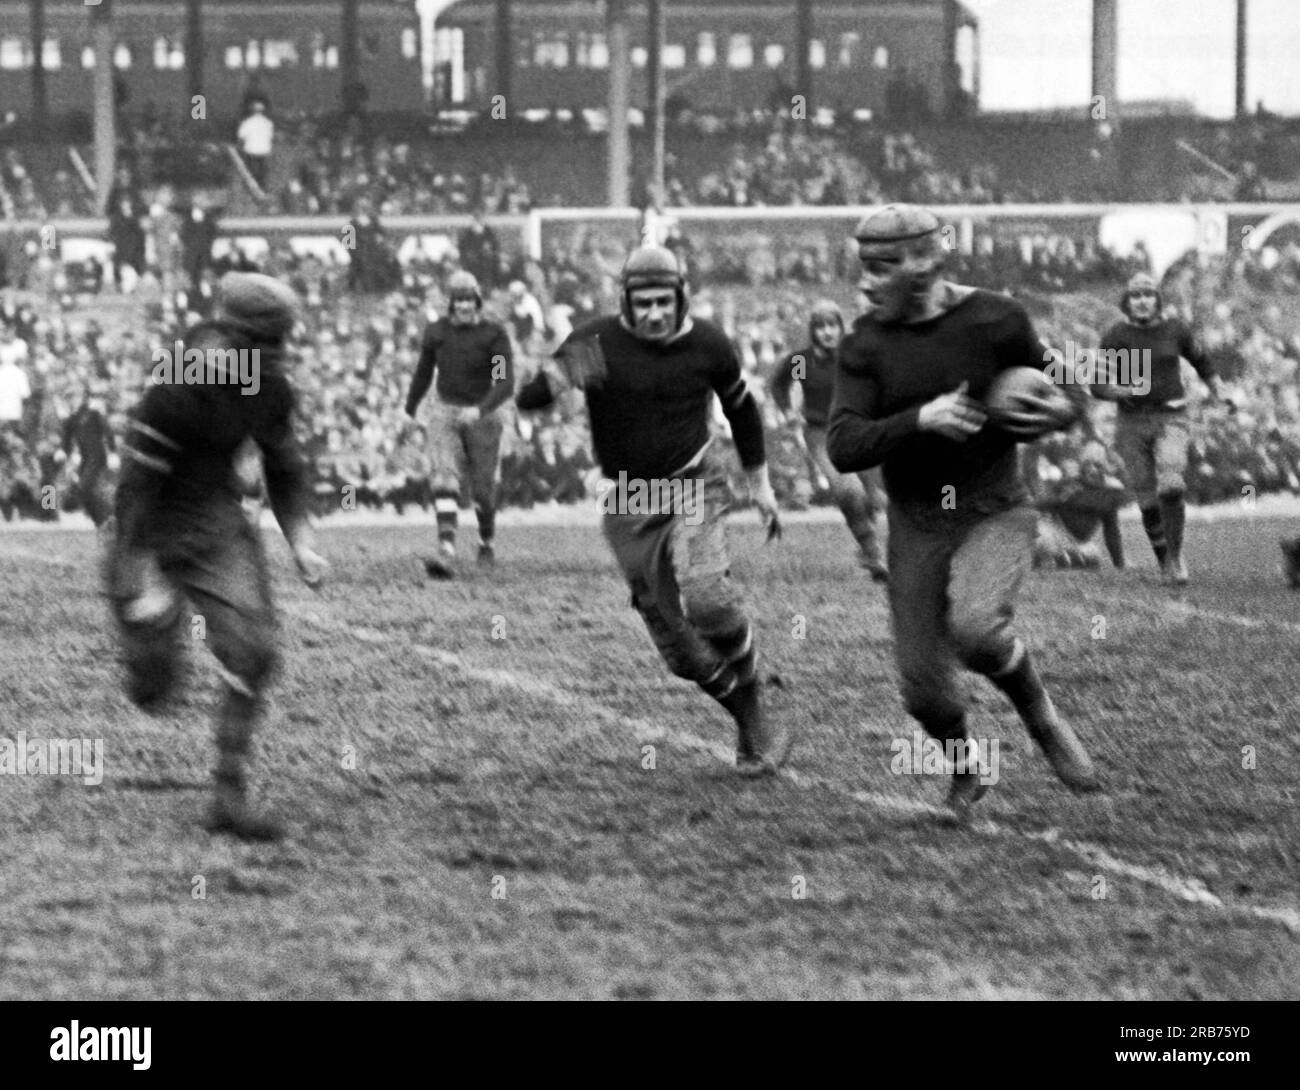 New York, New York: November 11, 1925 New York Giants rookie running back Heinie Benkert from Rutgers about to be tackled after a 30 yard run in a game aginst the Rochester Jeffersons. He went on to also play for the Pottsville Maroons and the Orange/Newark Tornadoes. Stock Photo